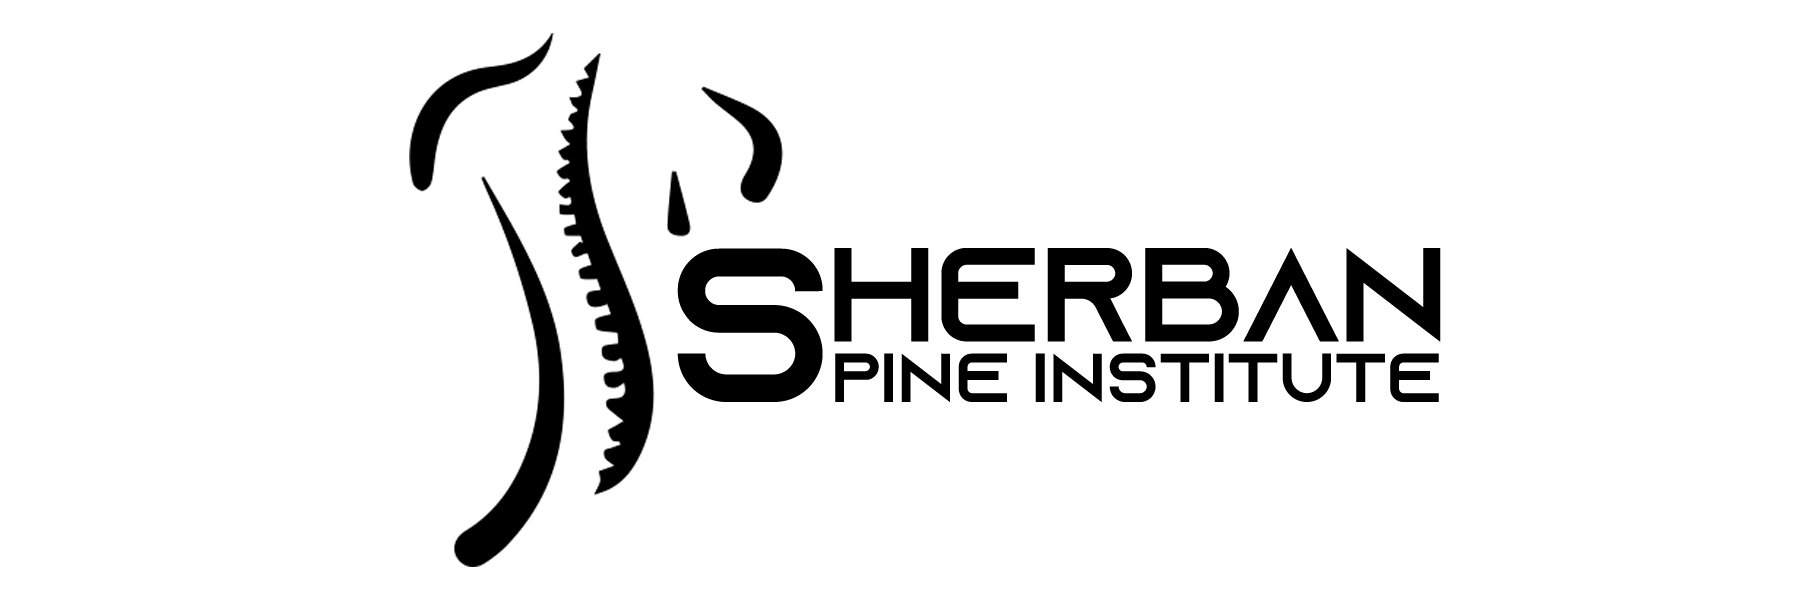 Sherban Spine Institute | Serving all of Florida